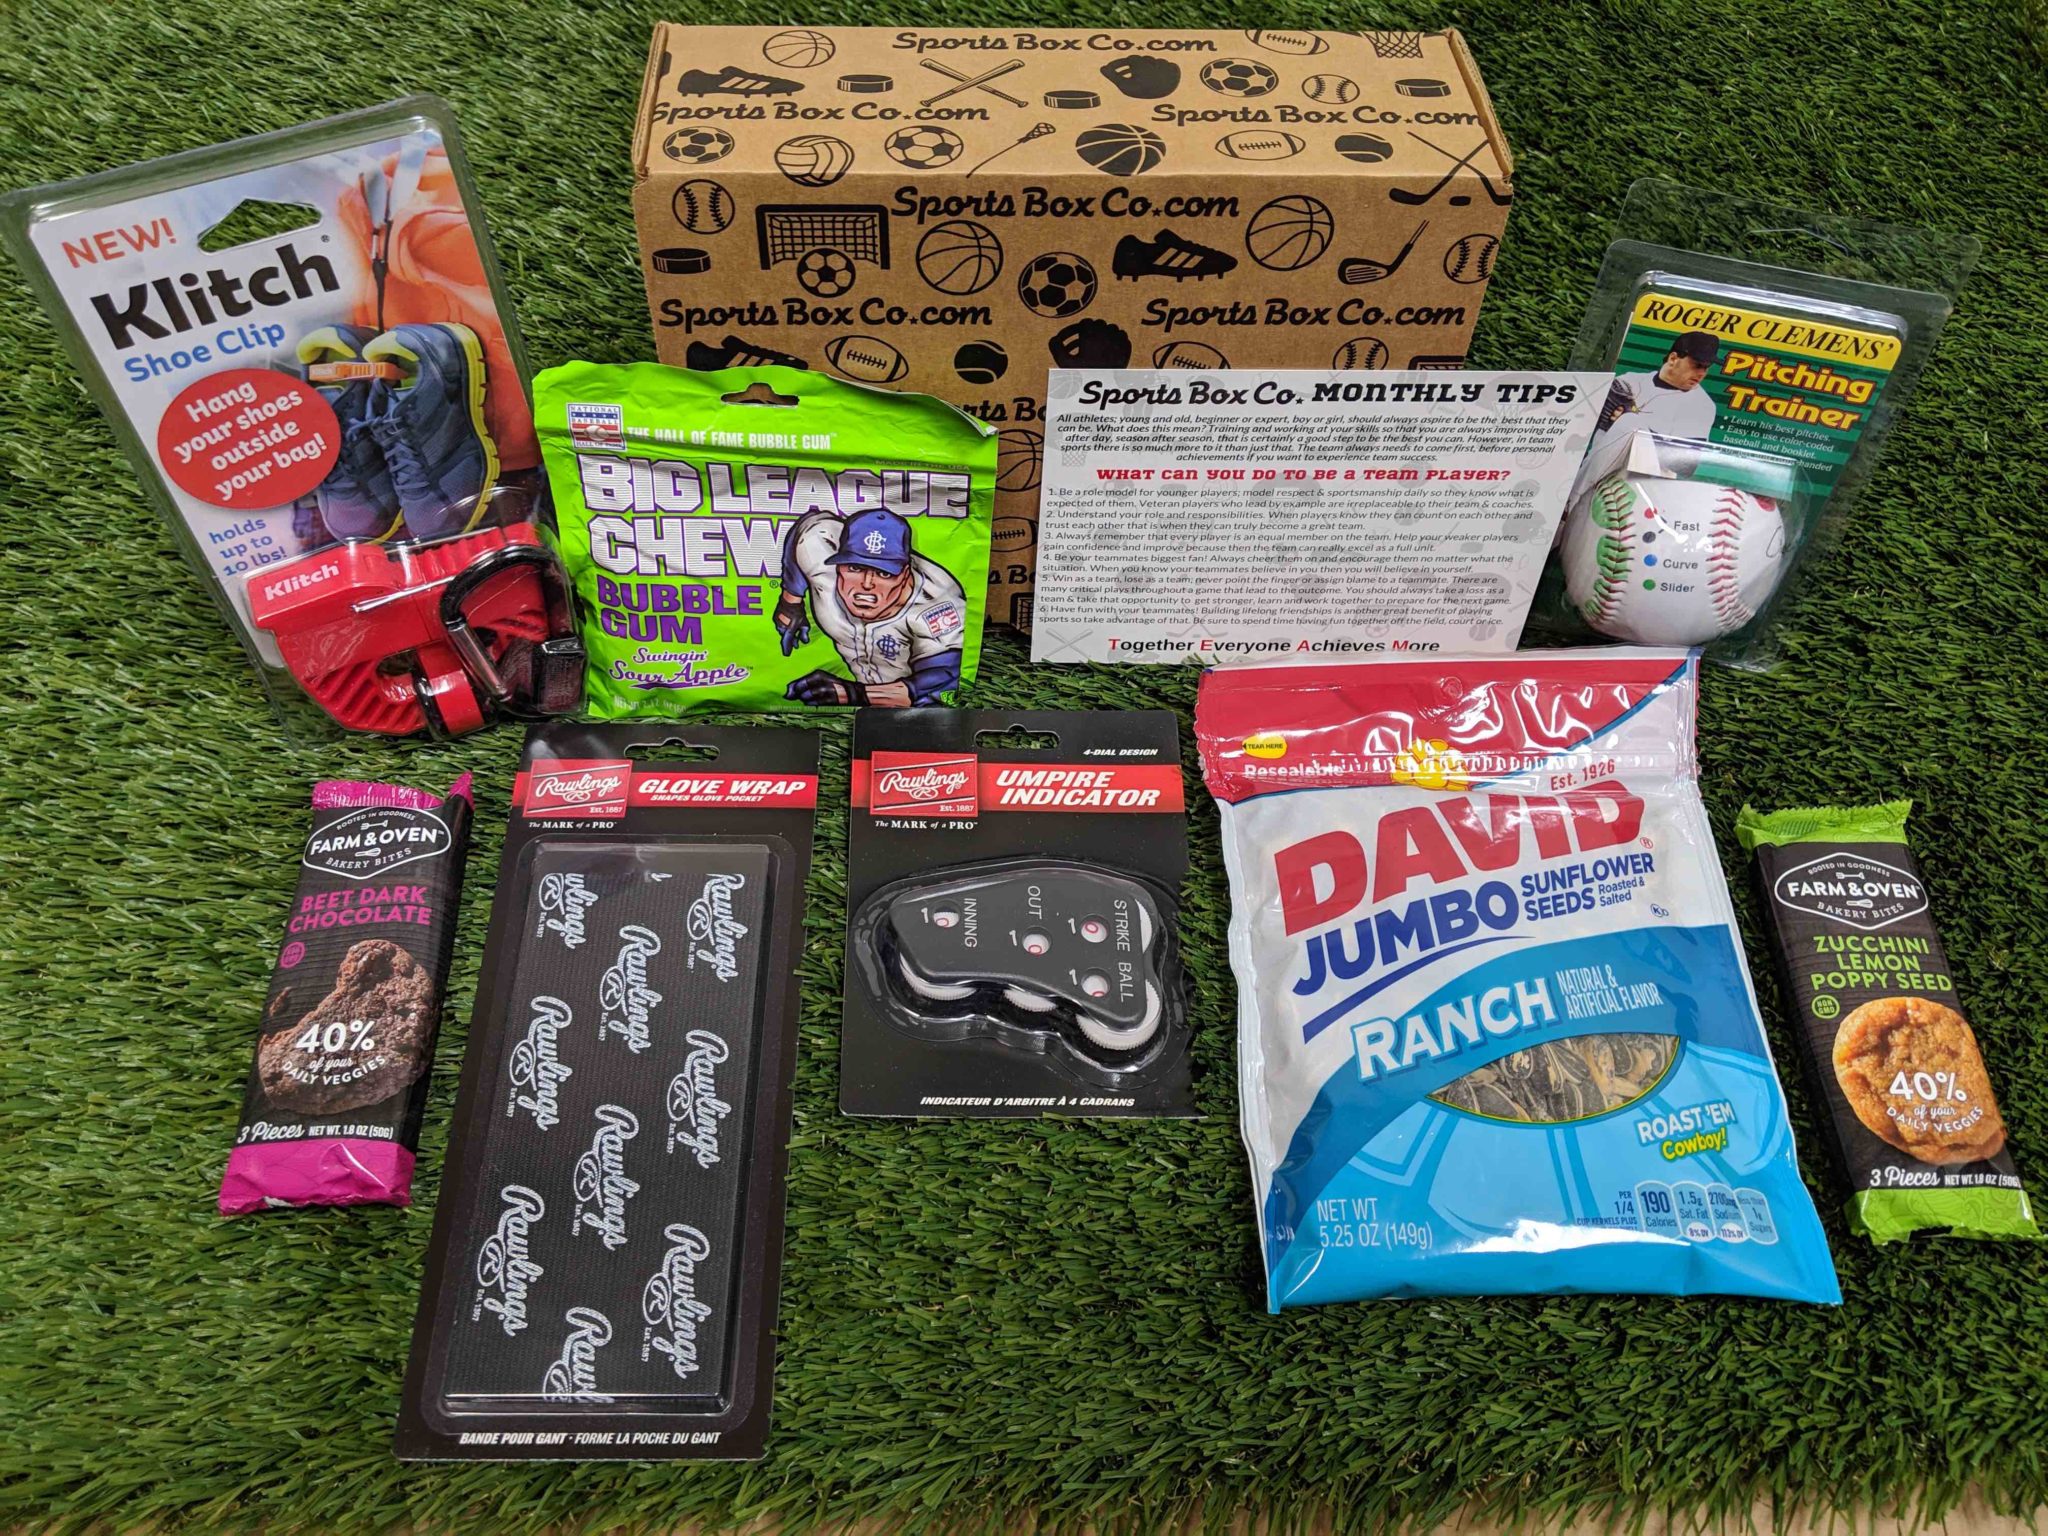 best subscription boxes for kids